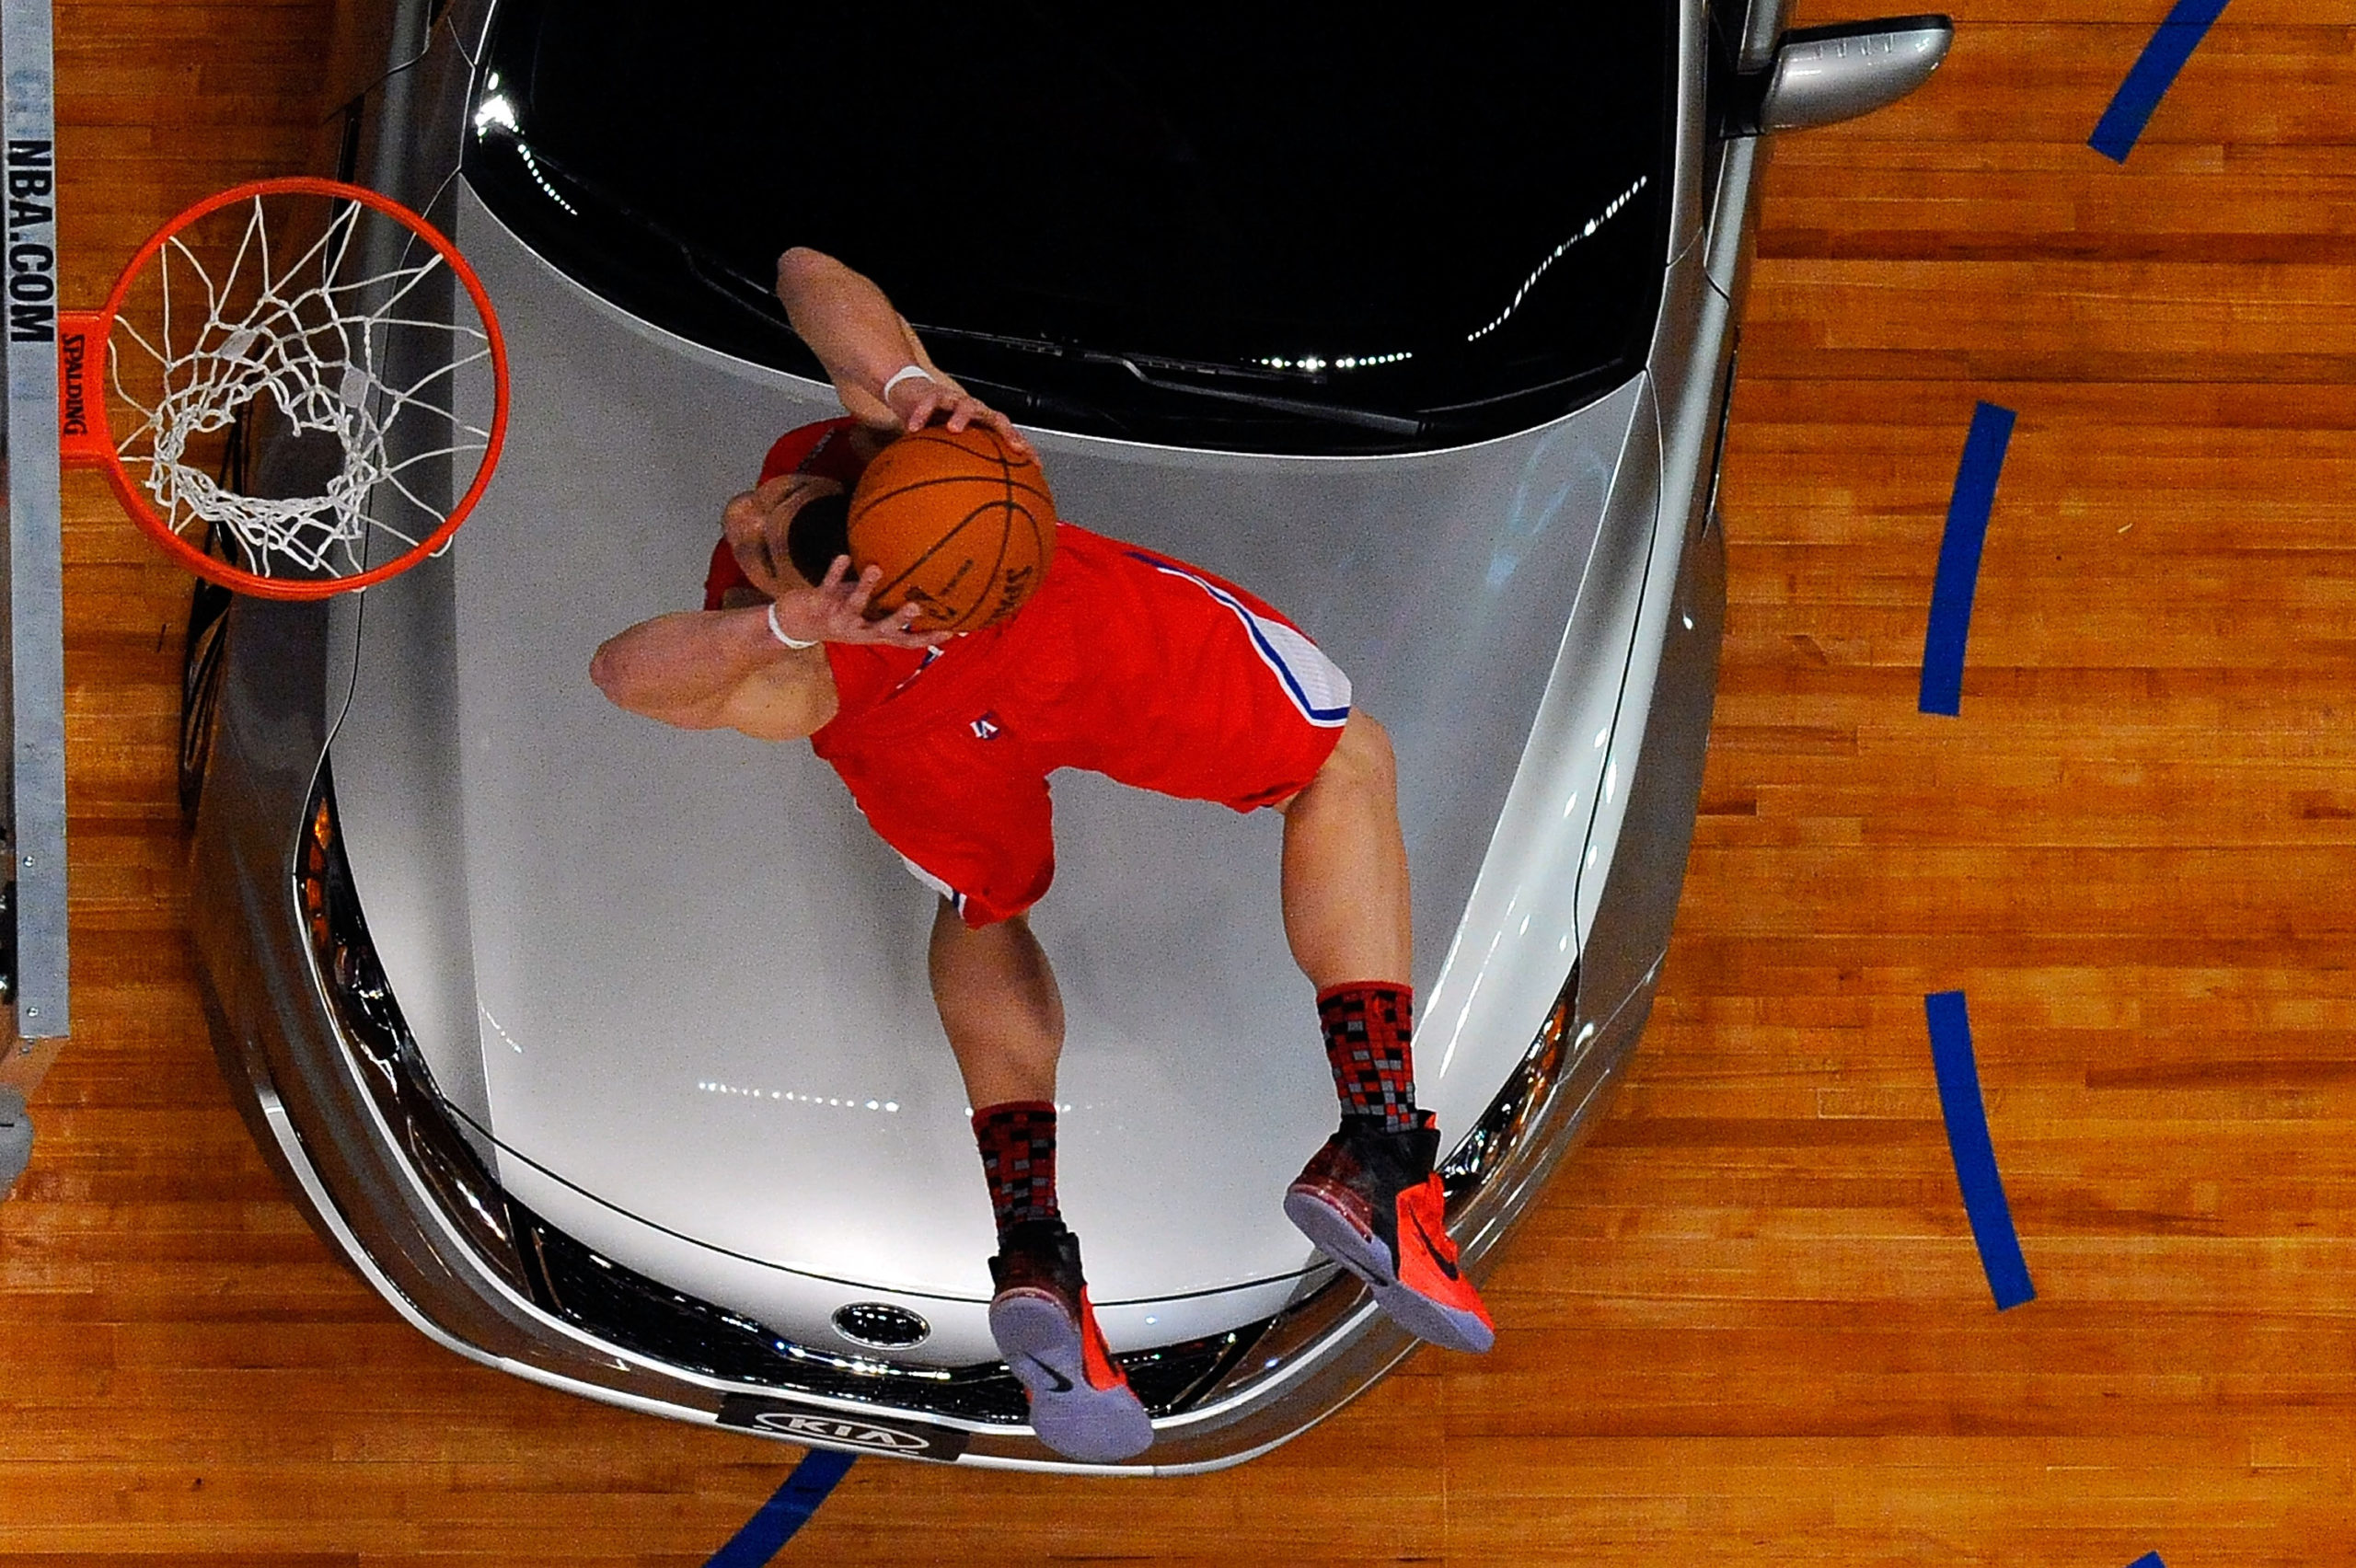 LOS ANGELES, CA - FEBRUARY 19: Blake Griffin #32 of the Los Angeles Clippers dunks the ball over a car in the final round of the Sprite Slam Dunk Contest apart of NBA All-Star Saturday Night at Staples Center on February 19, 2011 in Los Angeles, California. Kevork Djansezian/Getty Images